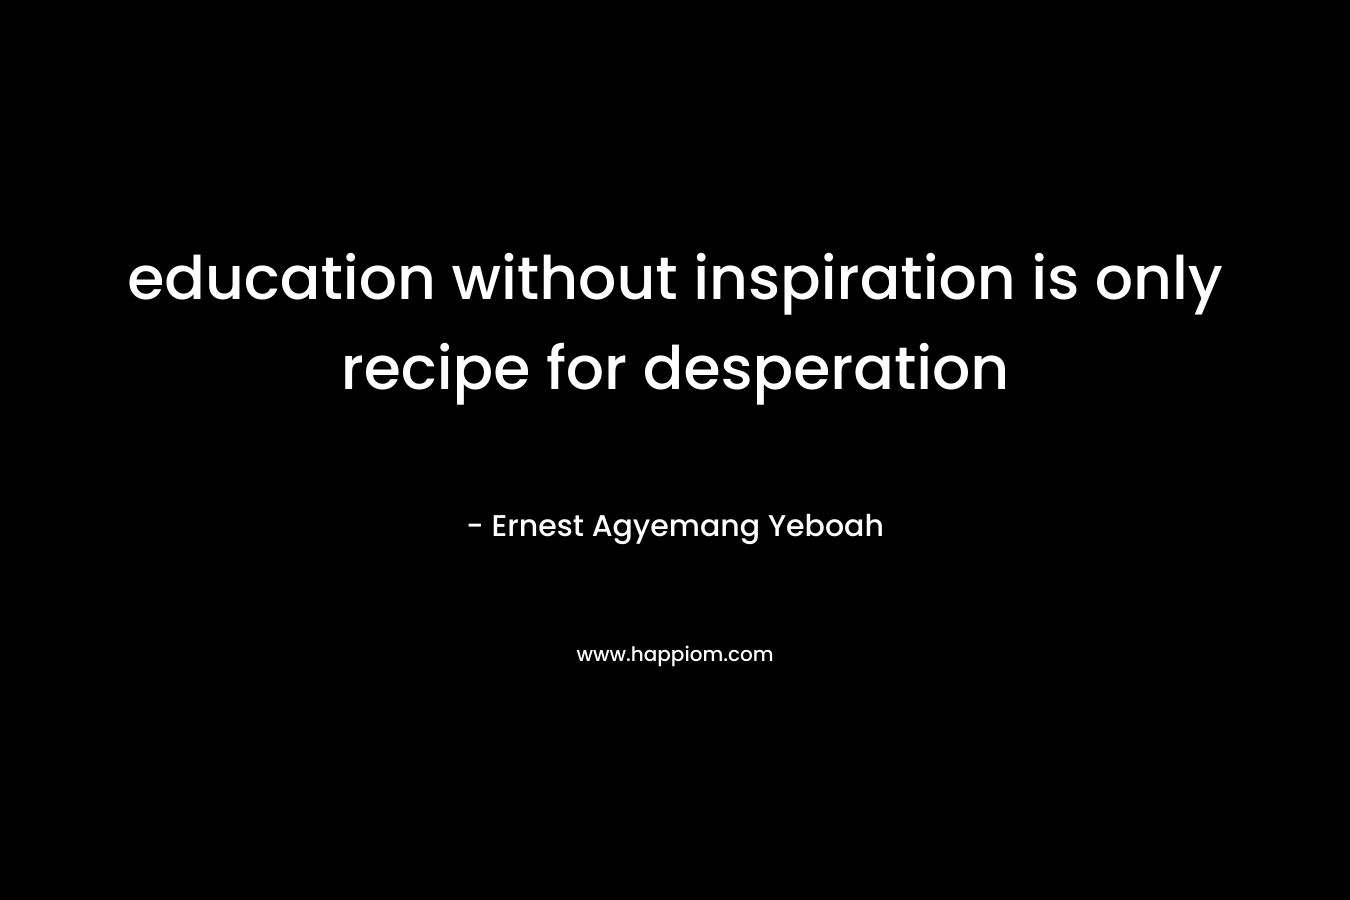 education without inspiration is only recipe for desperation